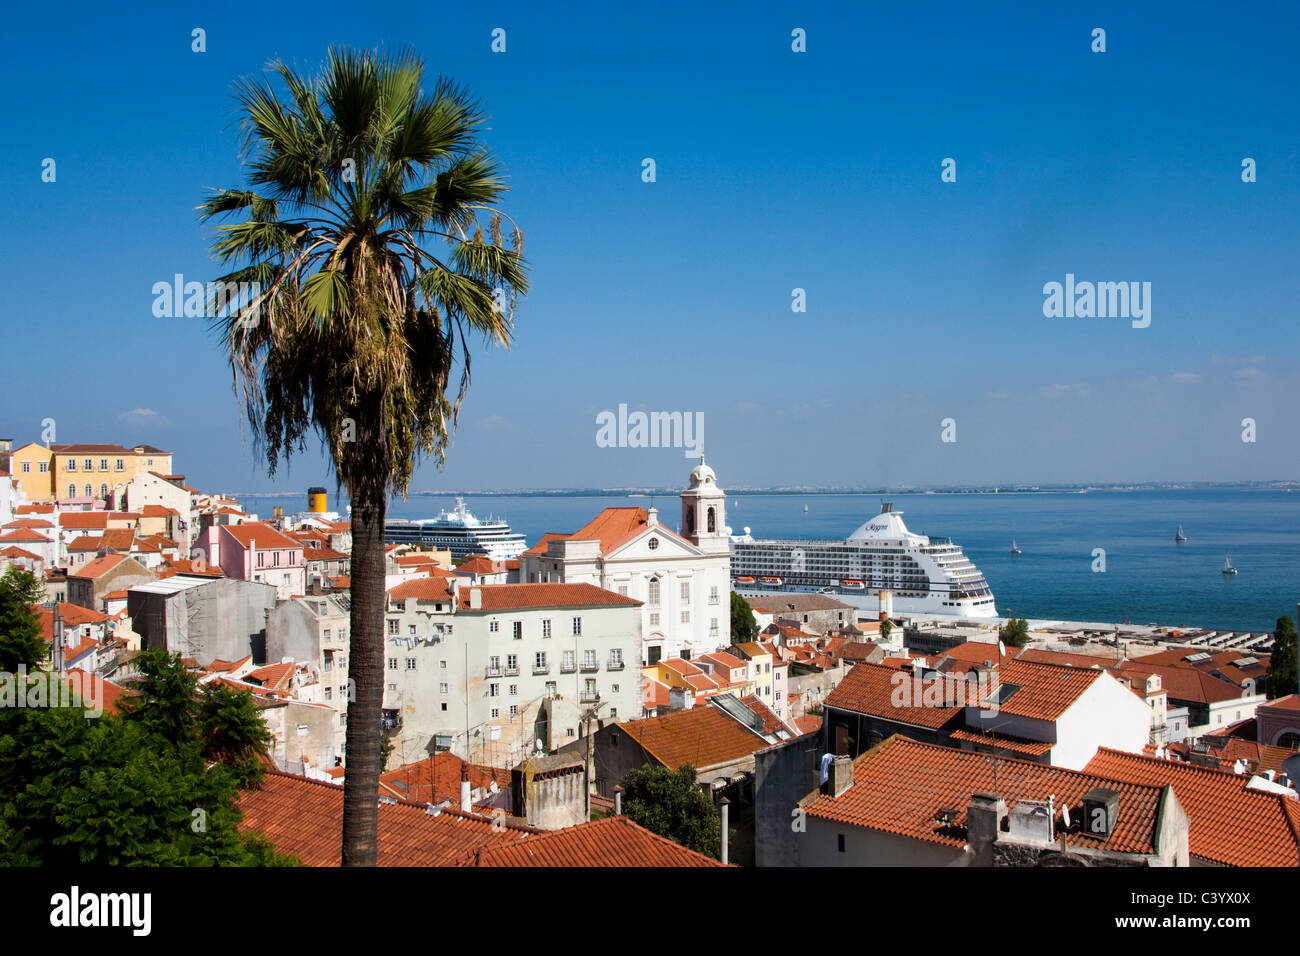 Portugal, Europe, Lisbon, Alfama, Old Town, roofs, sea, ships Stock Photo